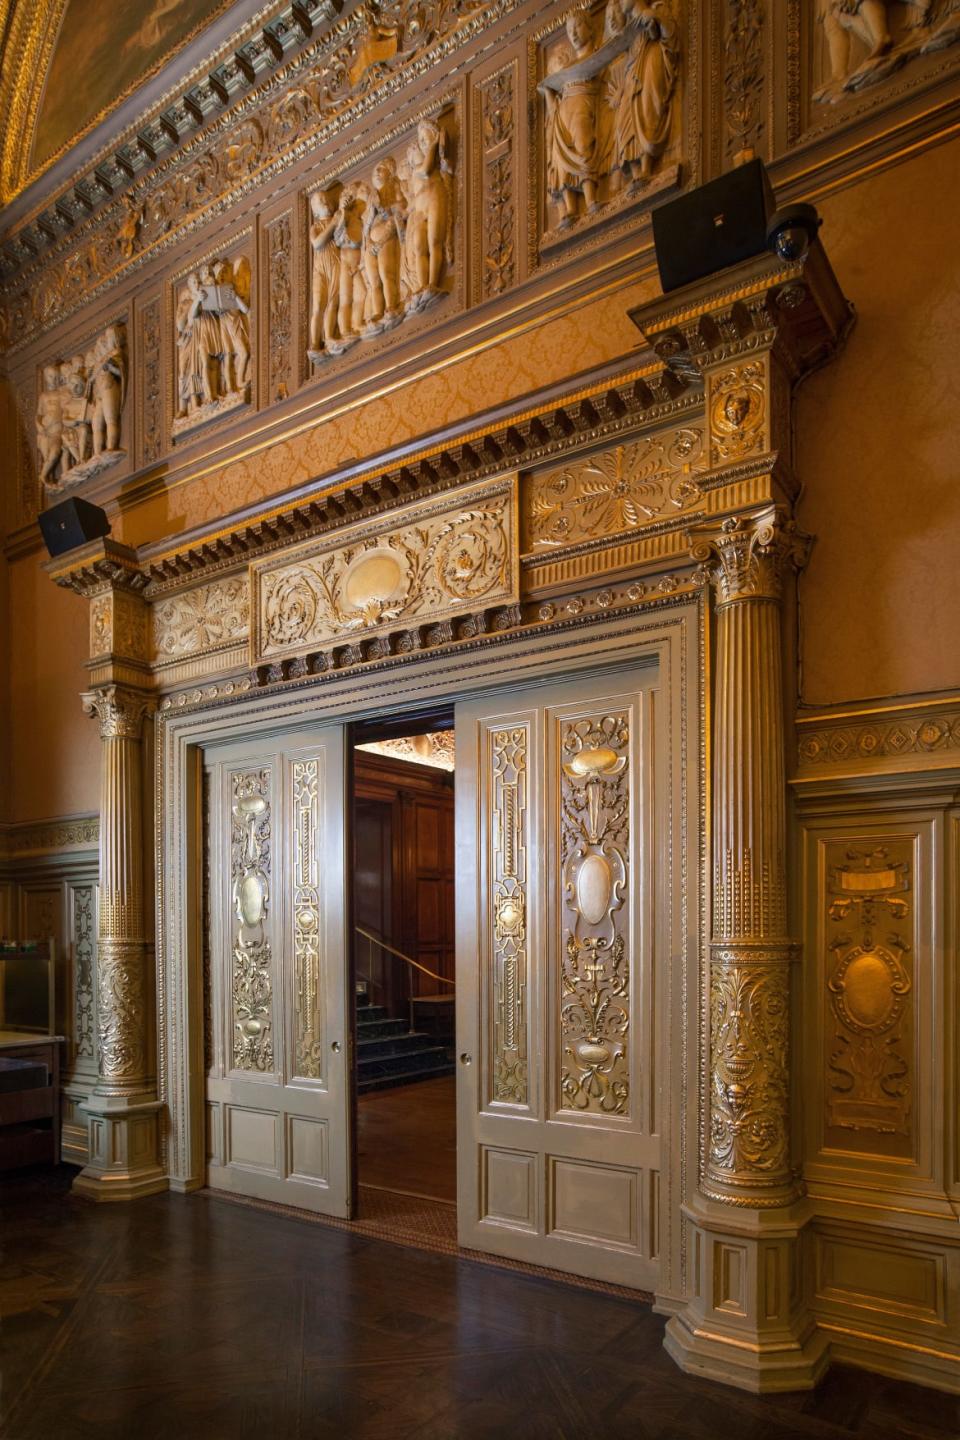 <div class="inline-image__caption"><p>The Gold Room's door of the Villard Mansion.</p></div> <div class="inline-image__credit">Courtesy of Lotte New York Palace Hotel</div>